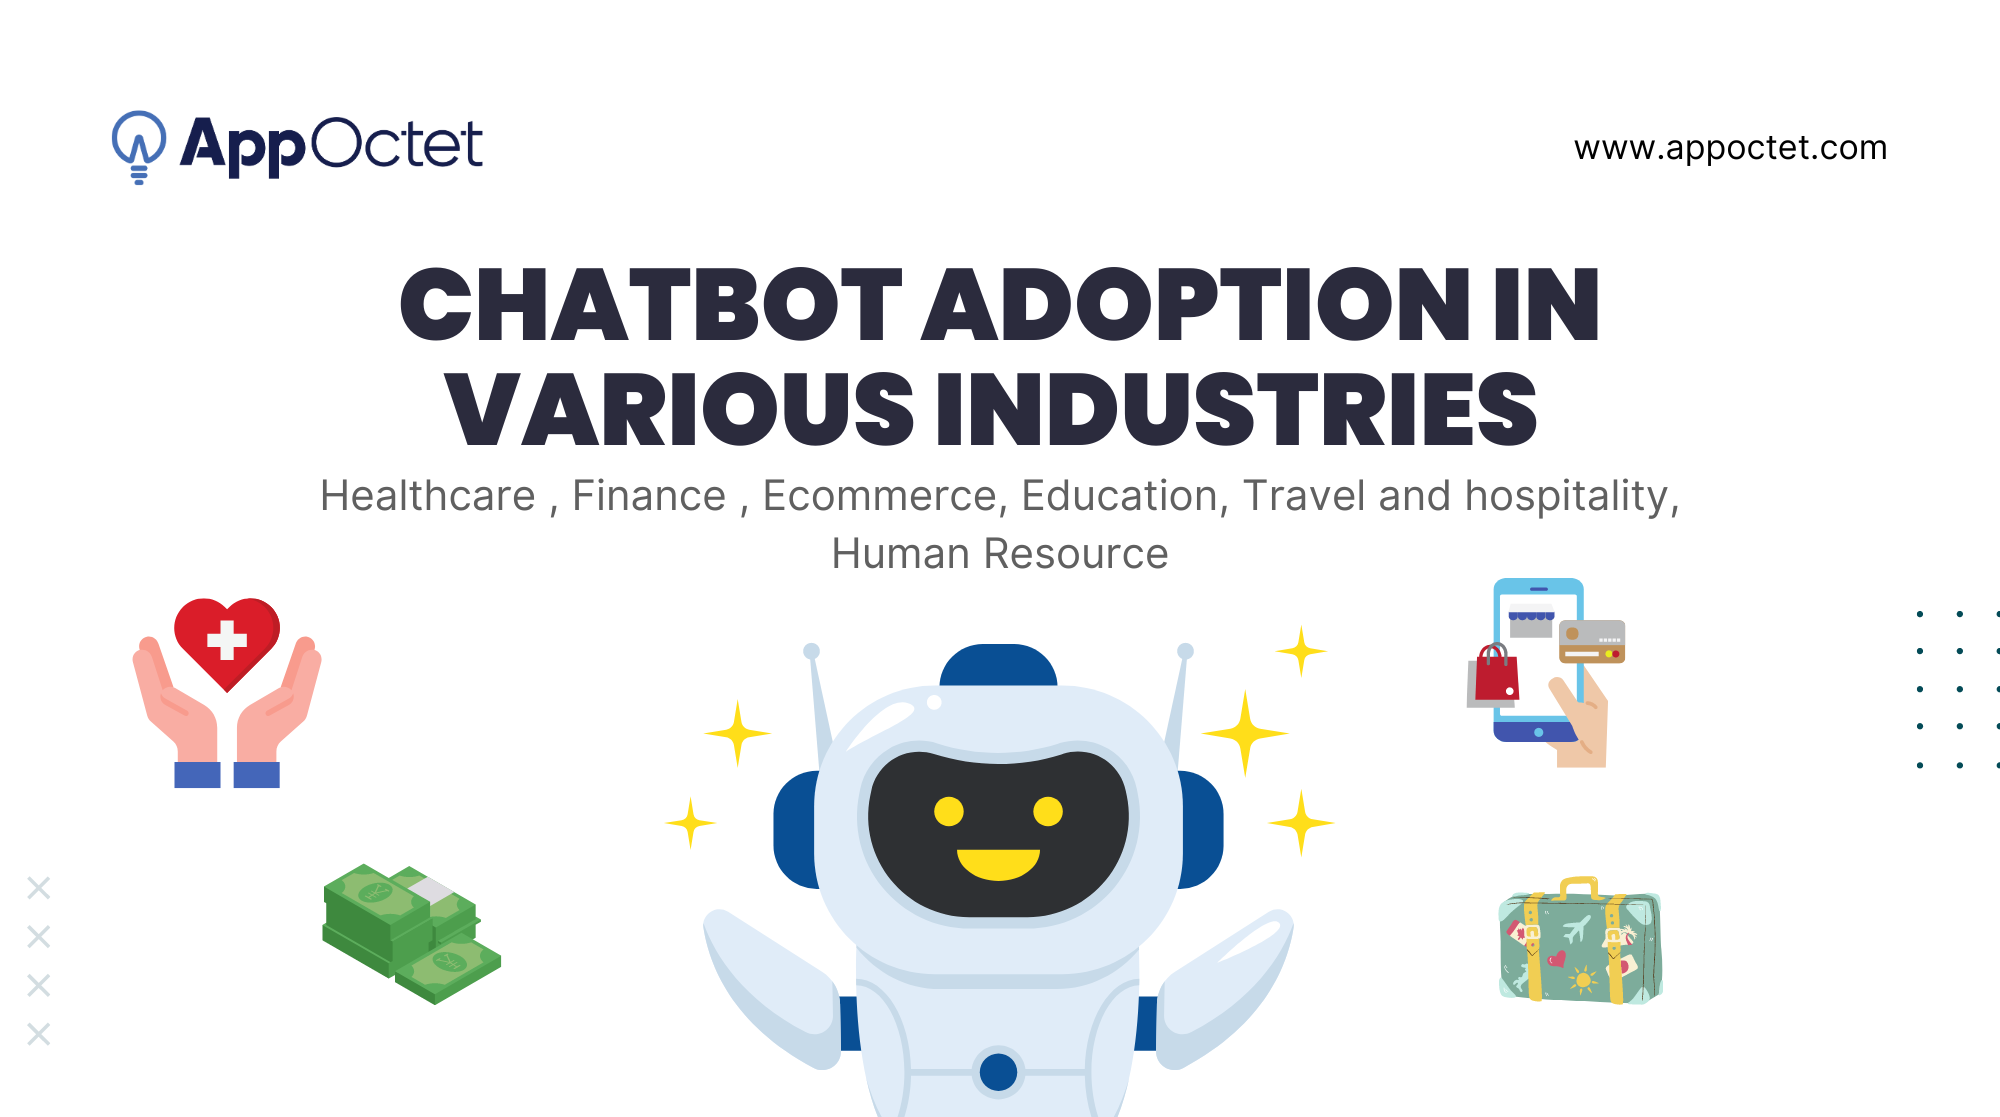 Chatbot adoption in various industries